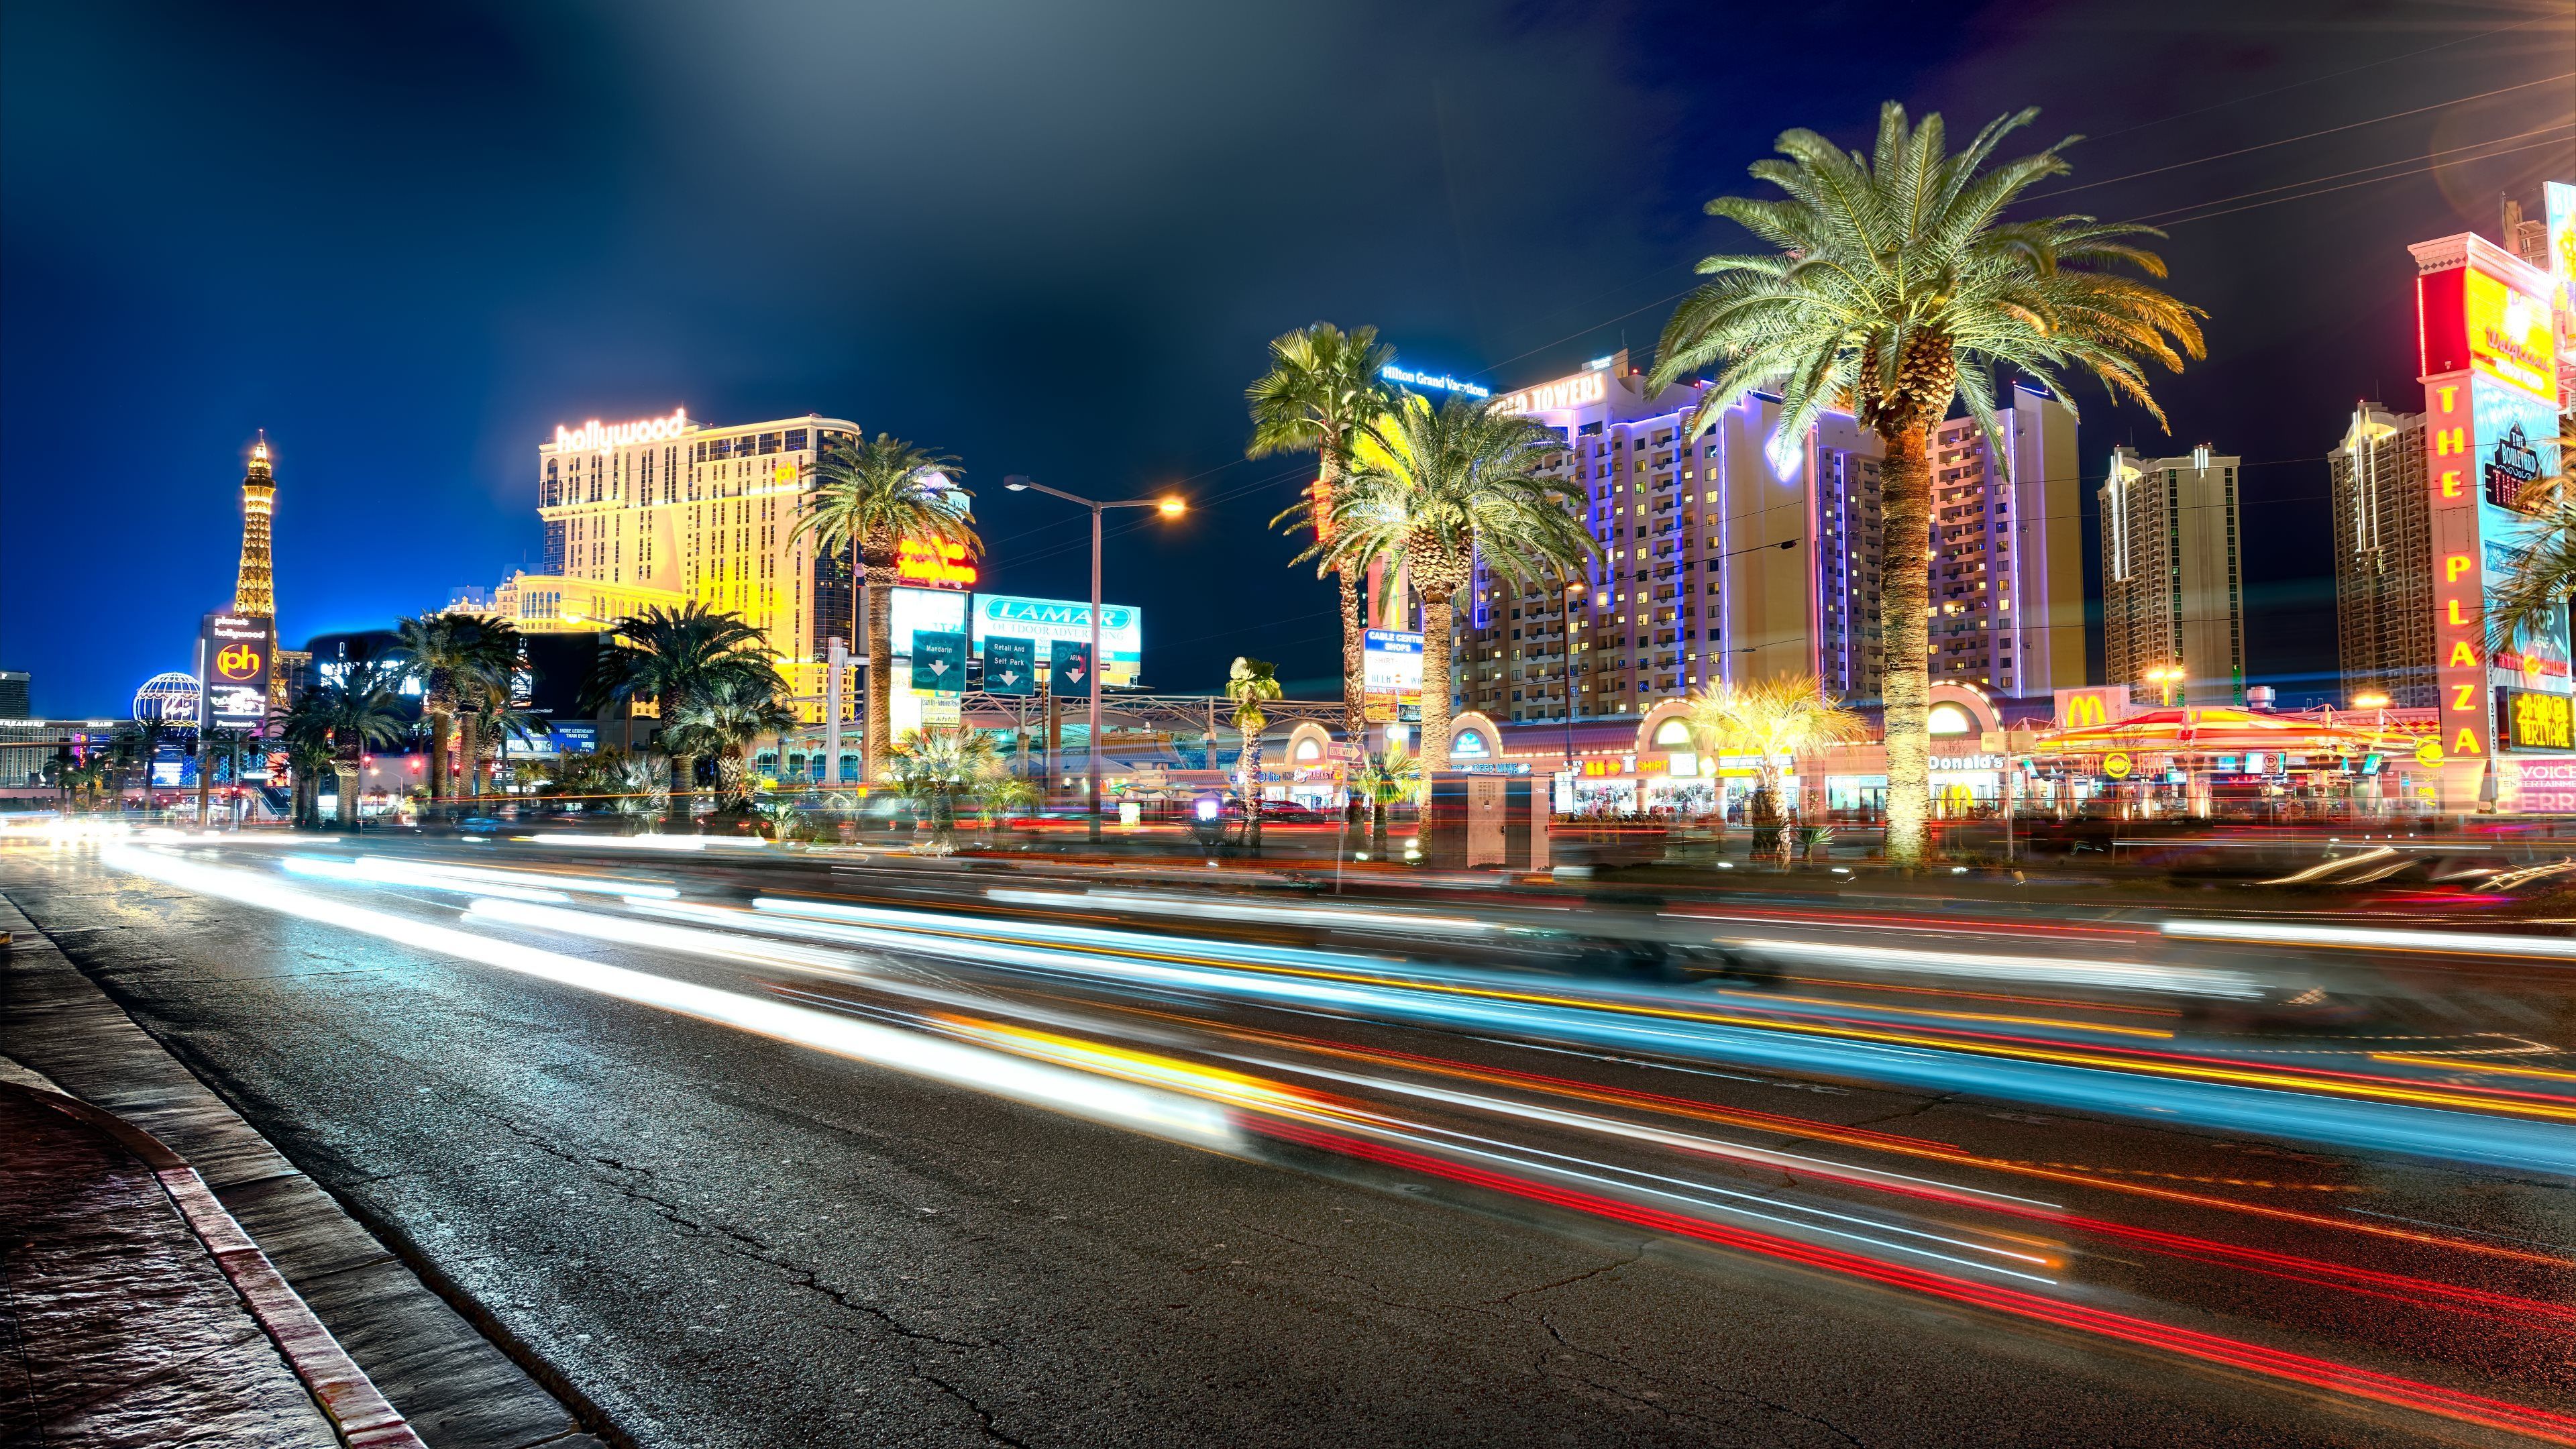 A busy street in Las Vegas with palm trees and neon lights. - Las Vegas